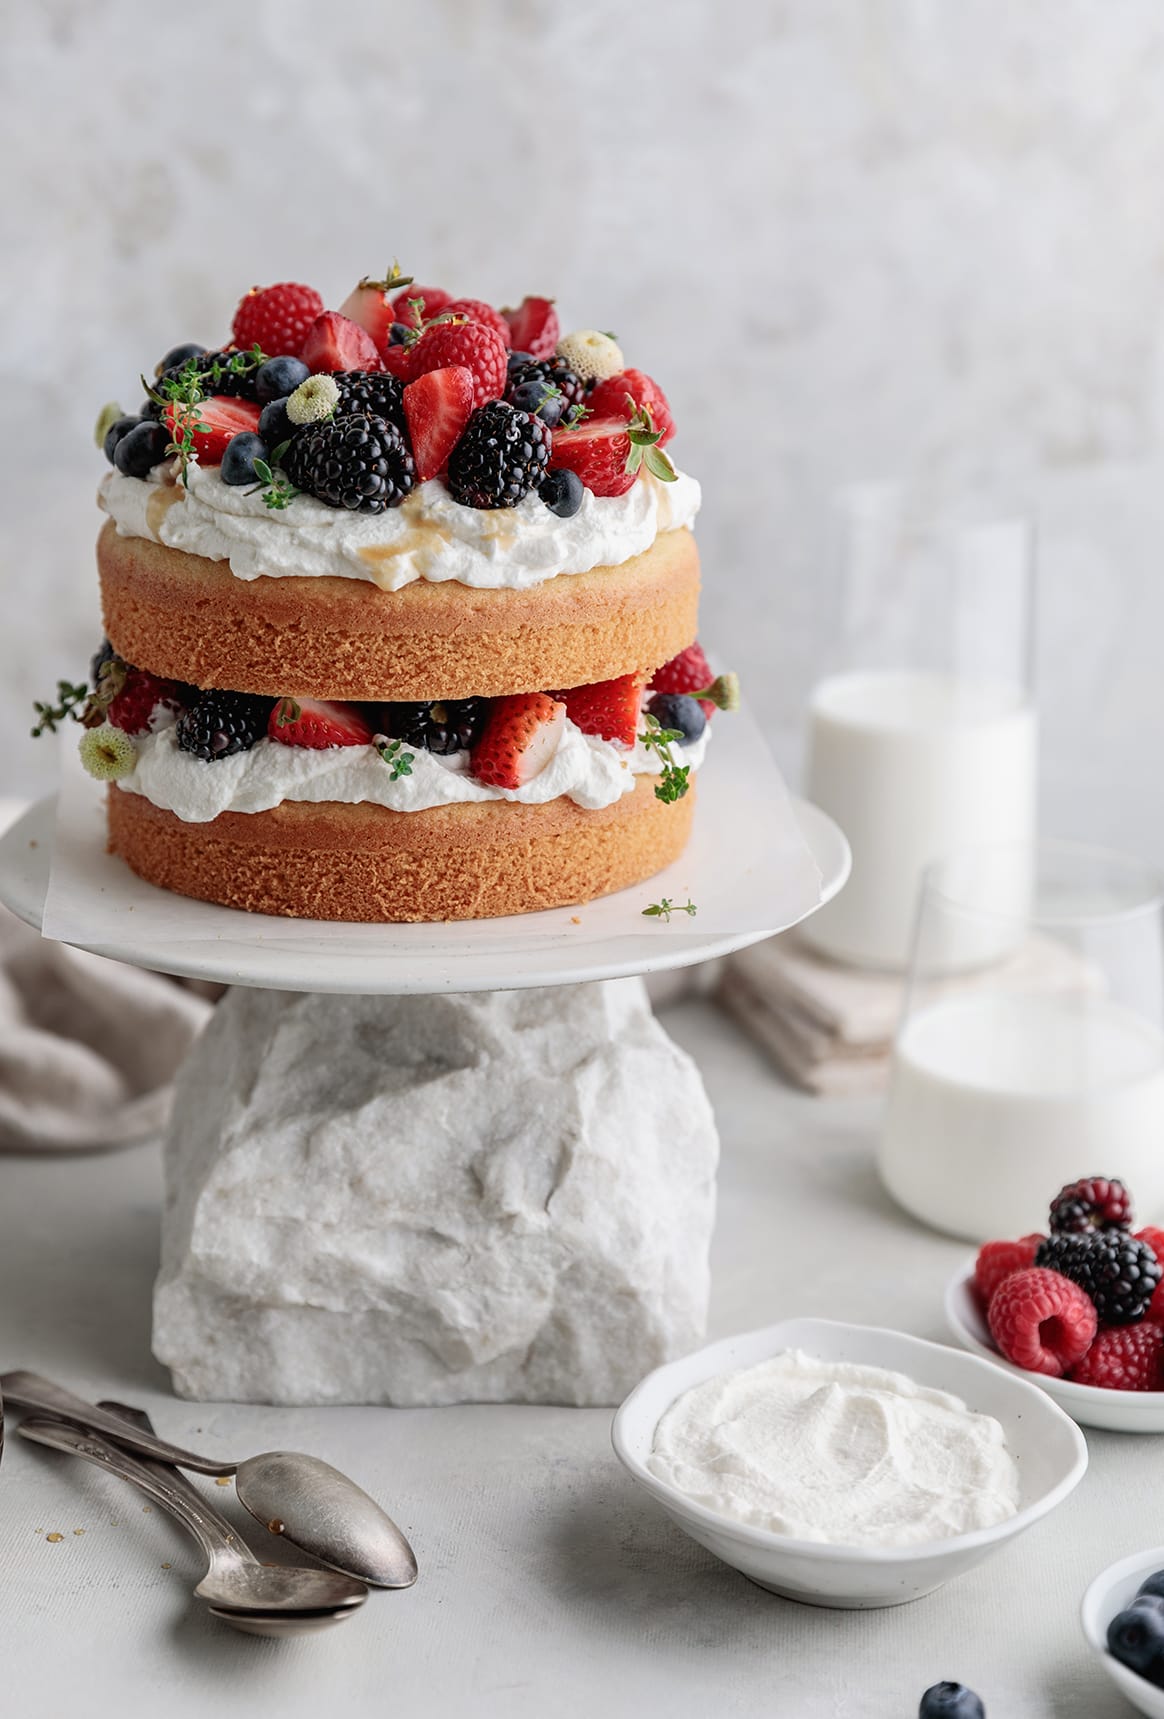 https://yogaofcooking.co/wp-content/uploads/2020/08/layered-almond-cake-with-berries-1.jpg